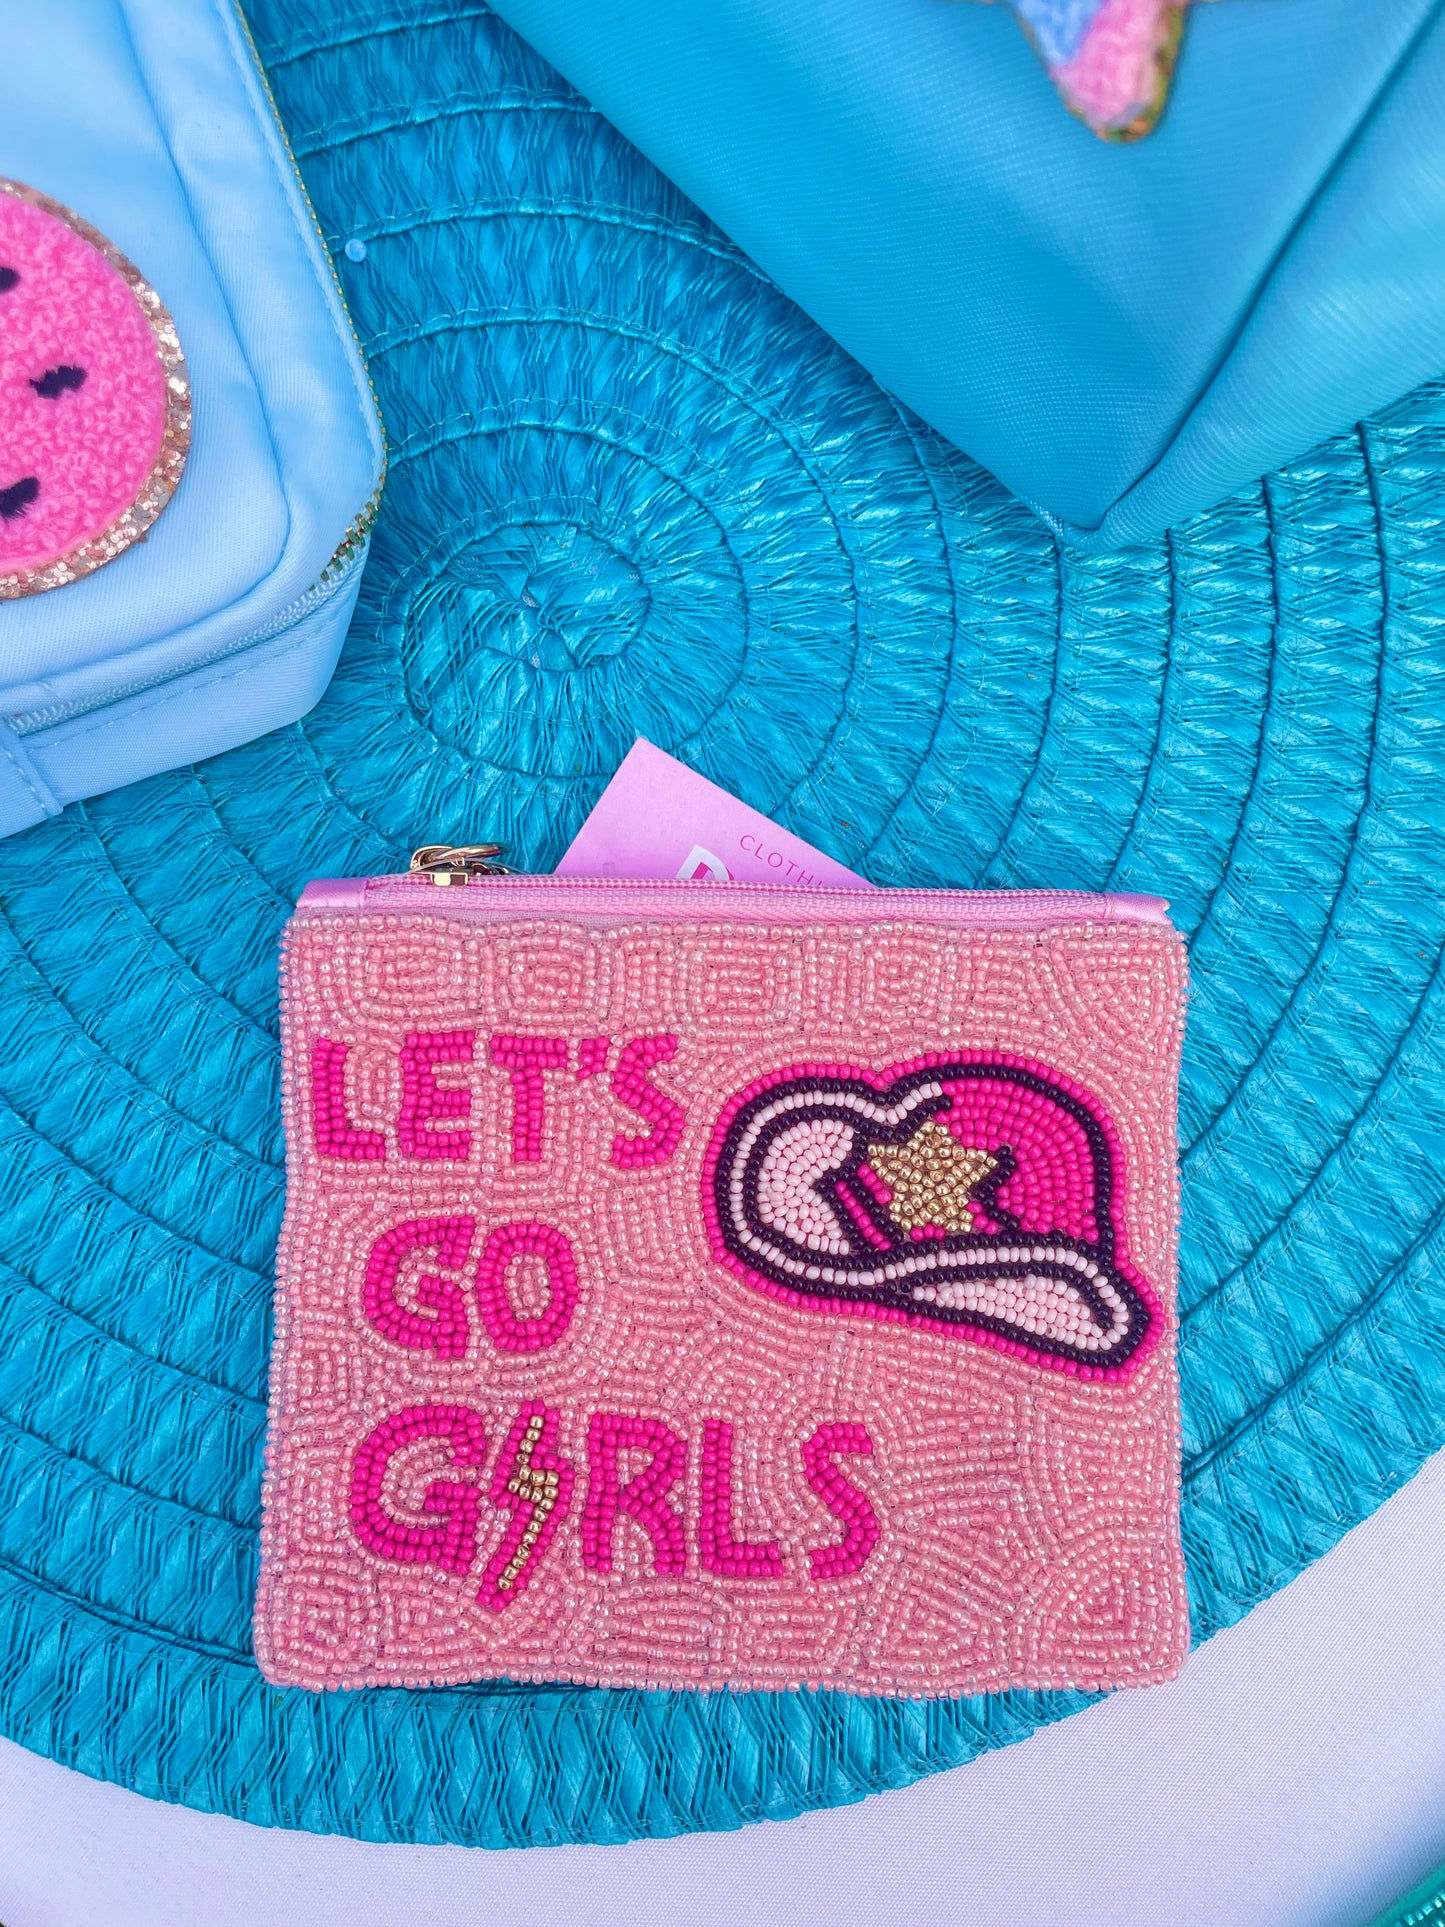 Let's Go Girls! - Pink Cowgirl Hat Beaded Bag